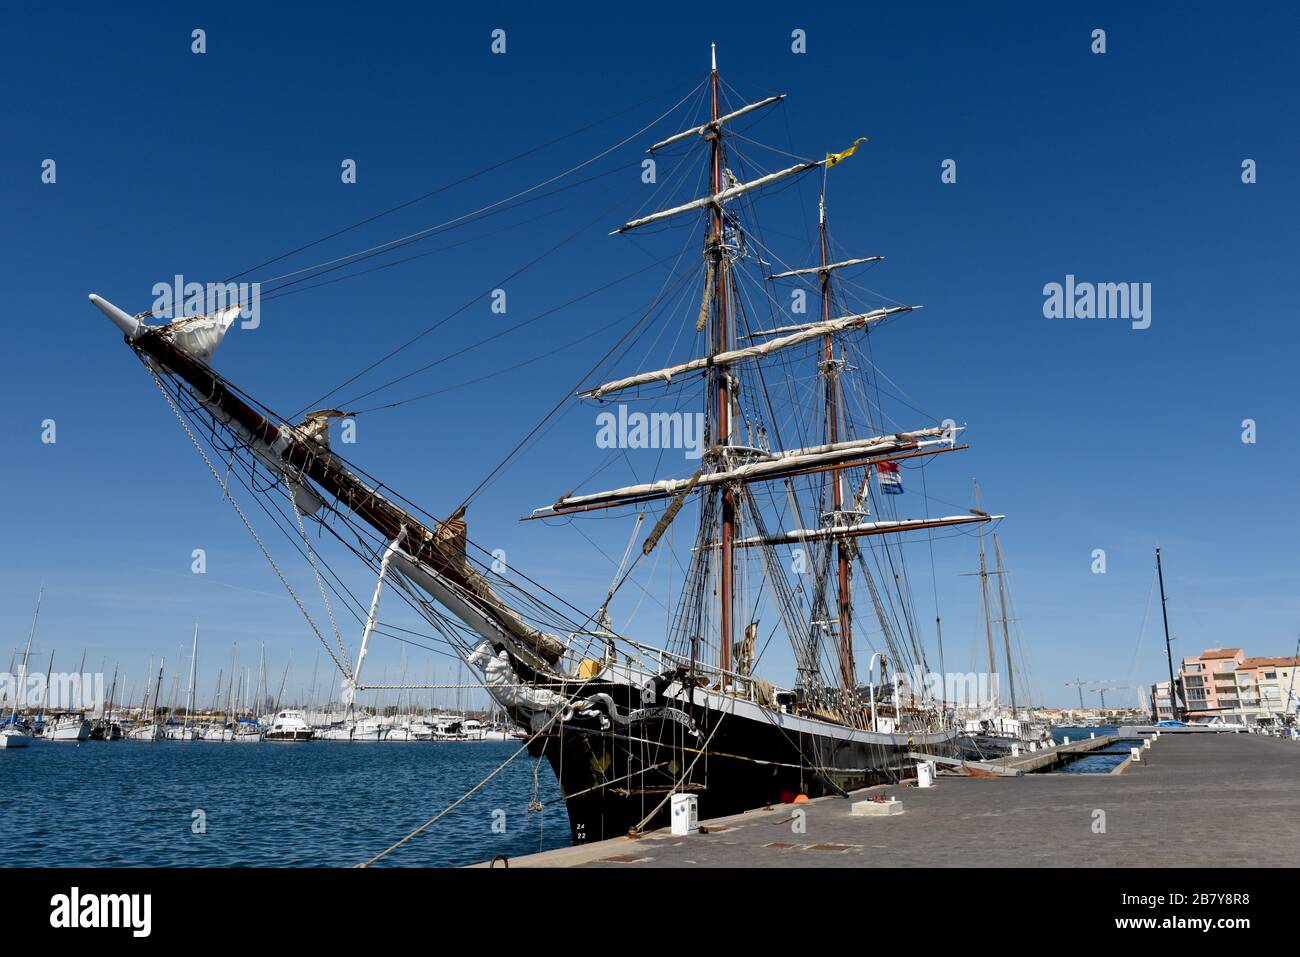 The Morgenster tall ship yacht moored at Center Nautique - French sailing school in Cap d'Agde, France Stock Photo